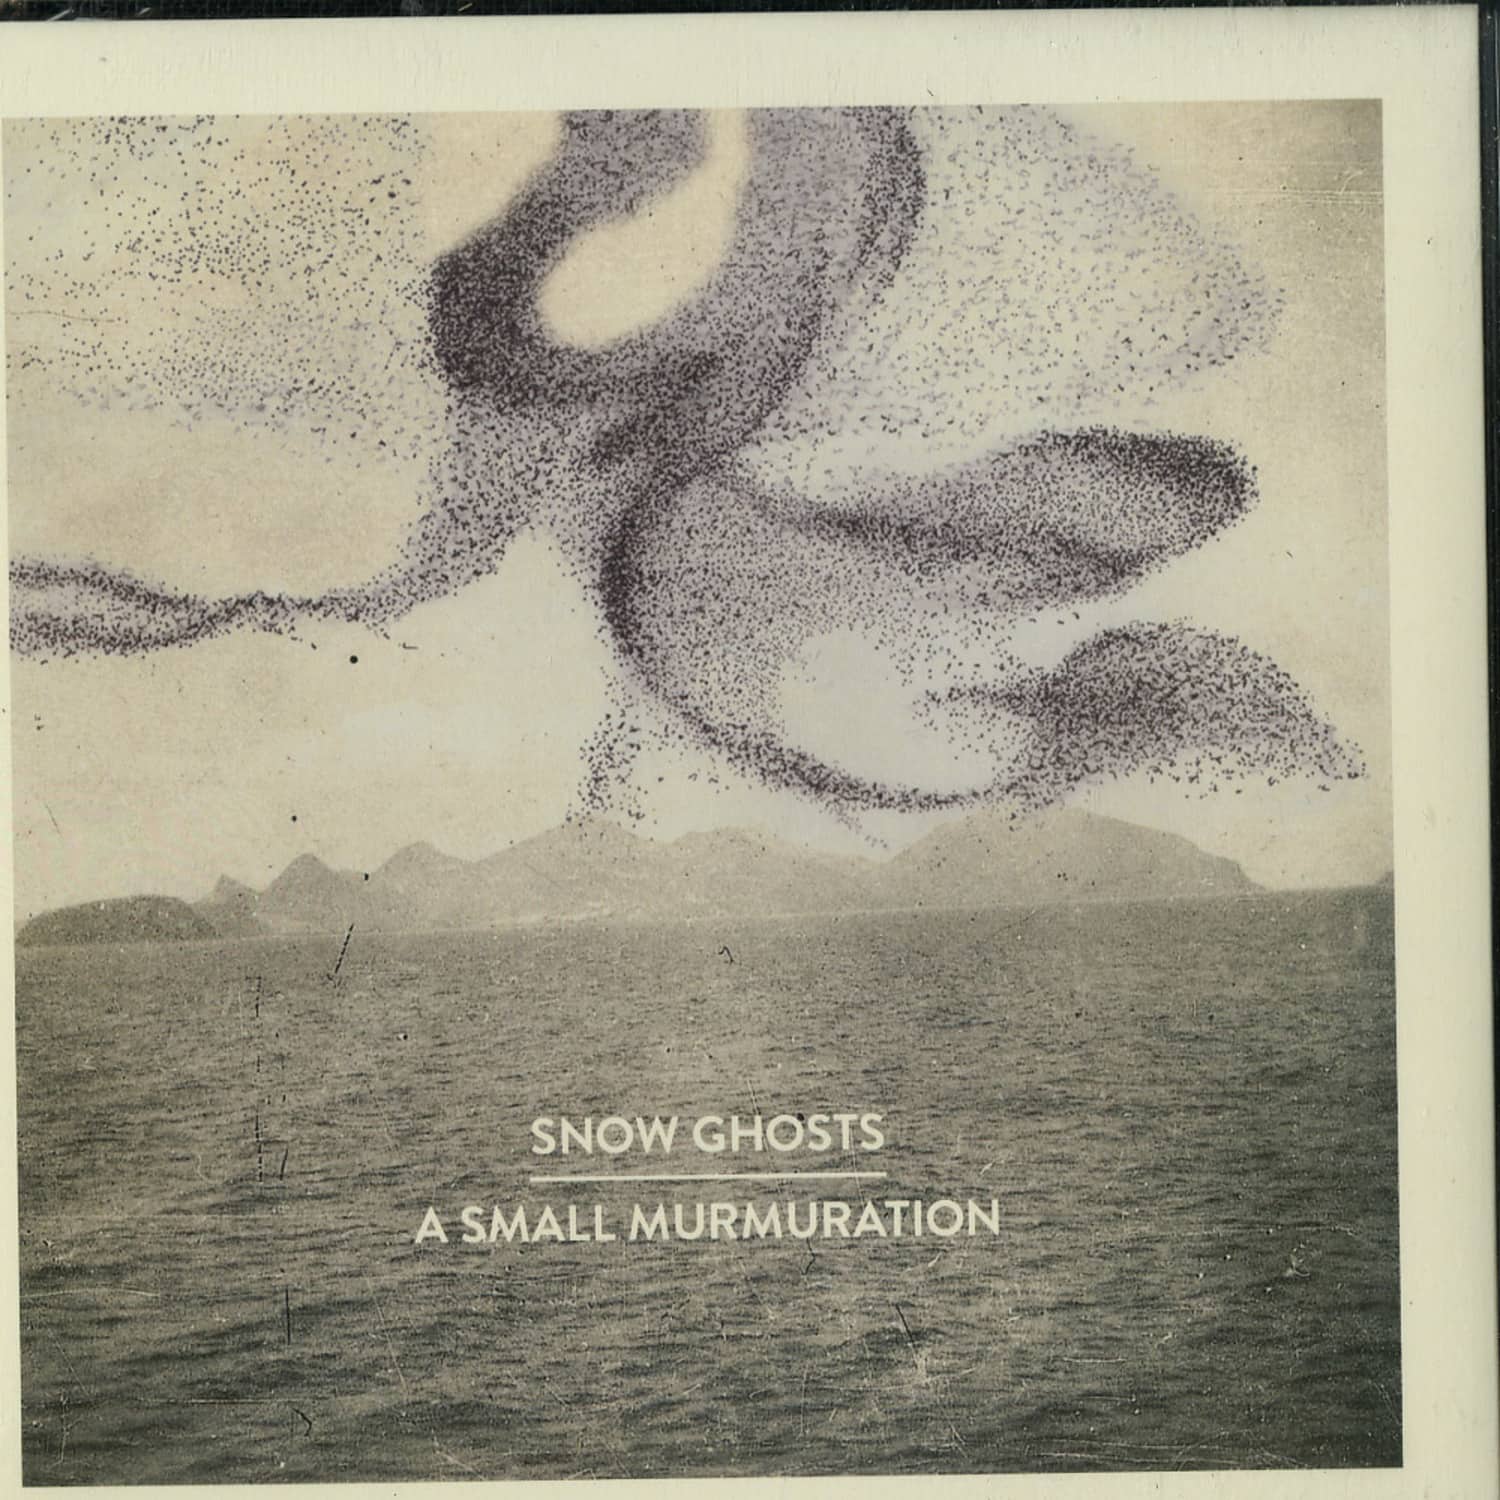 Snow Ghosts - A SMALL MURMURATION 